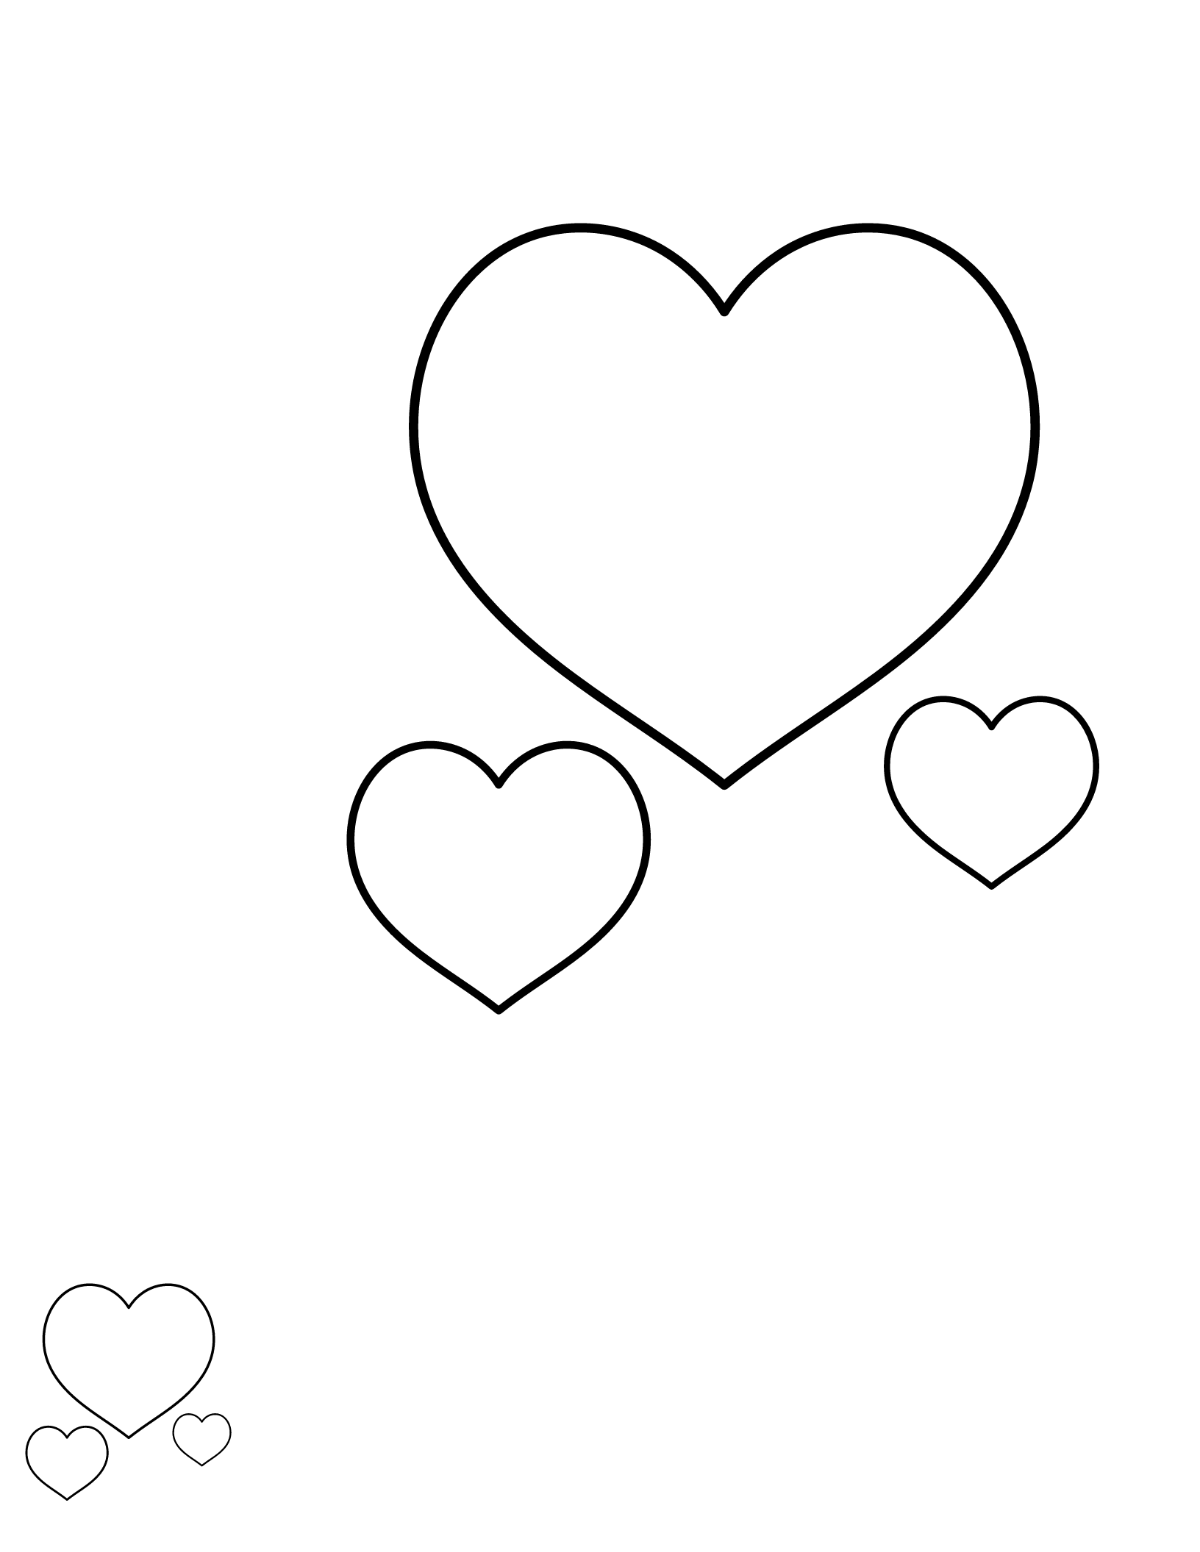 Simple Heart Shape Coloring Page Template